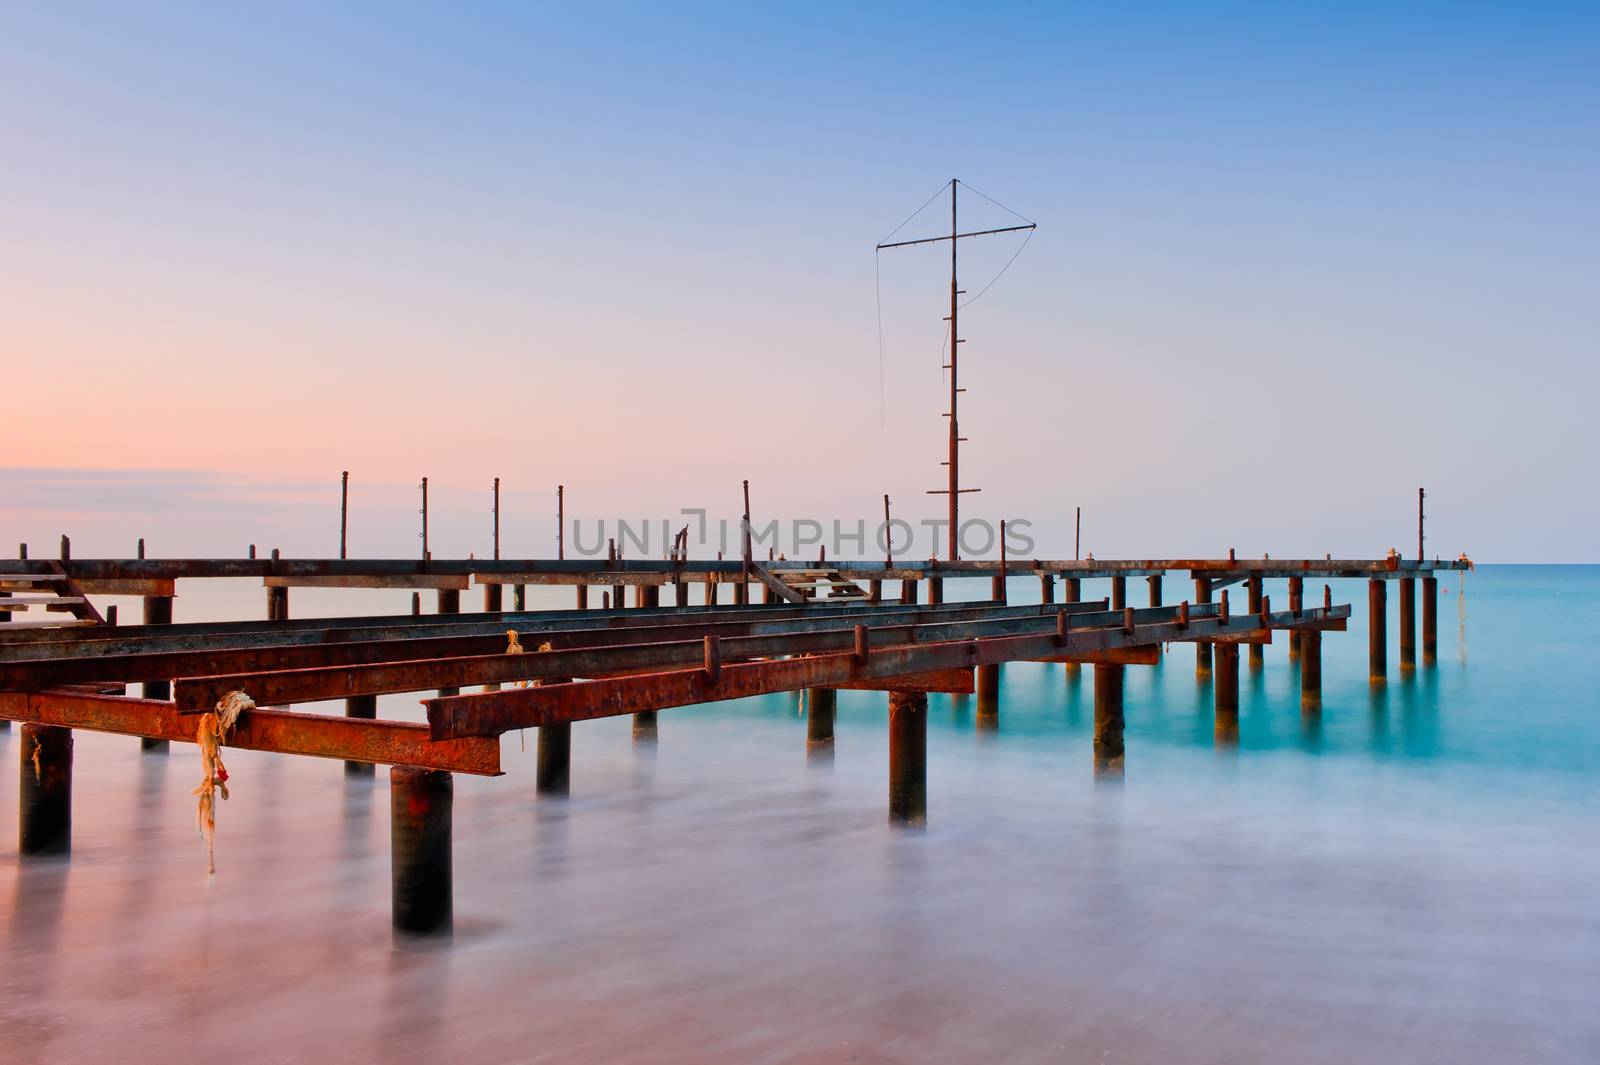 Old pier in the sea at dawn by kosmsos111